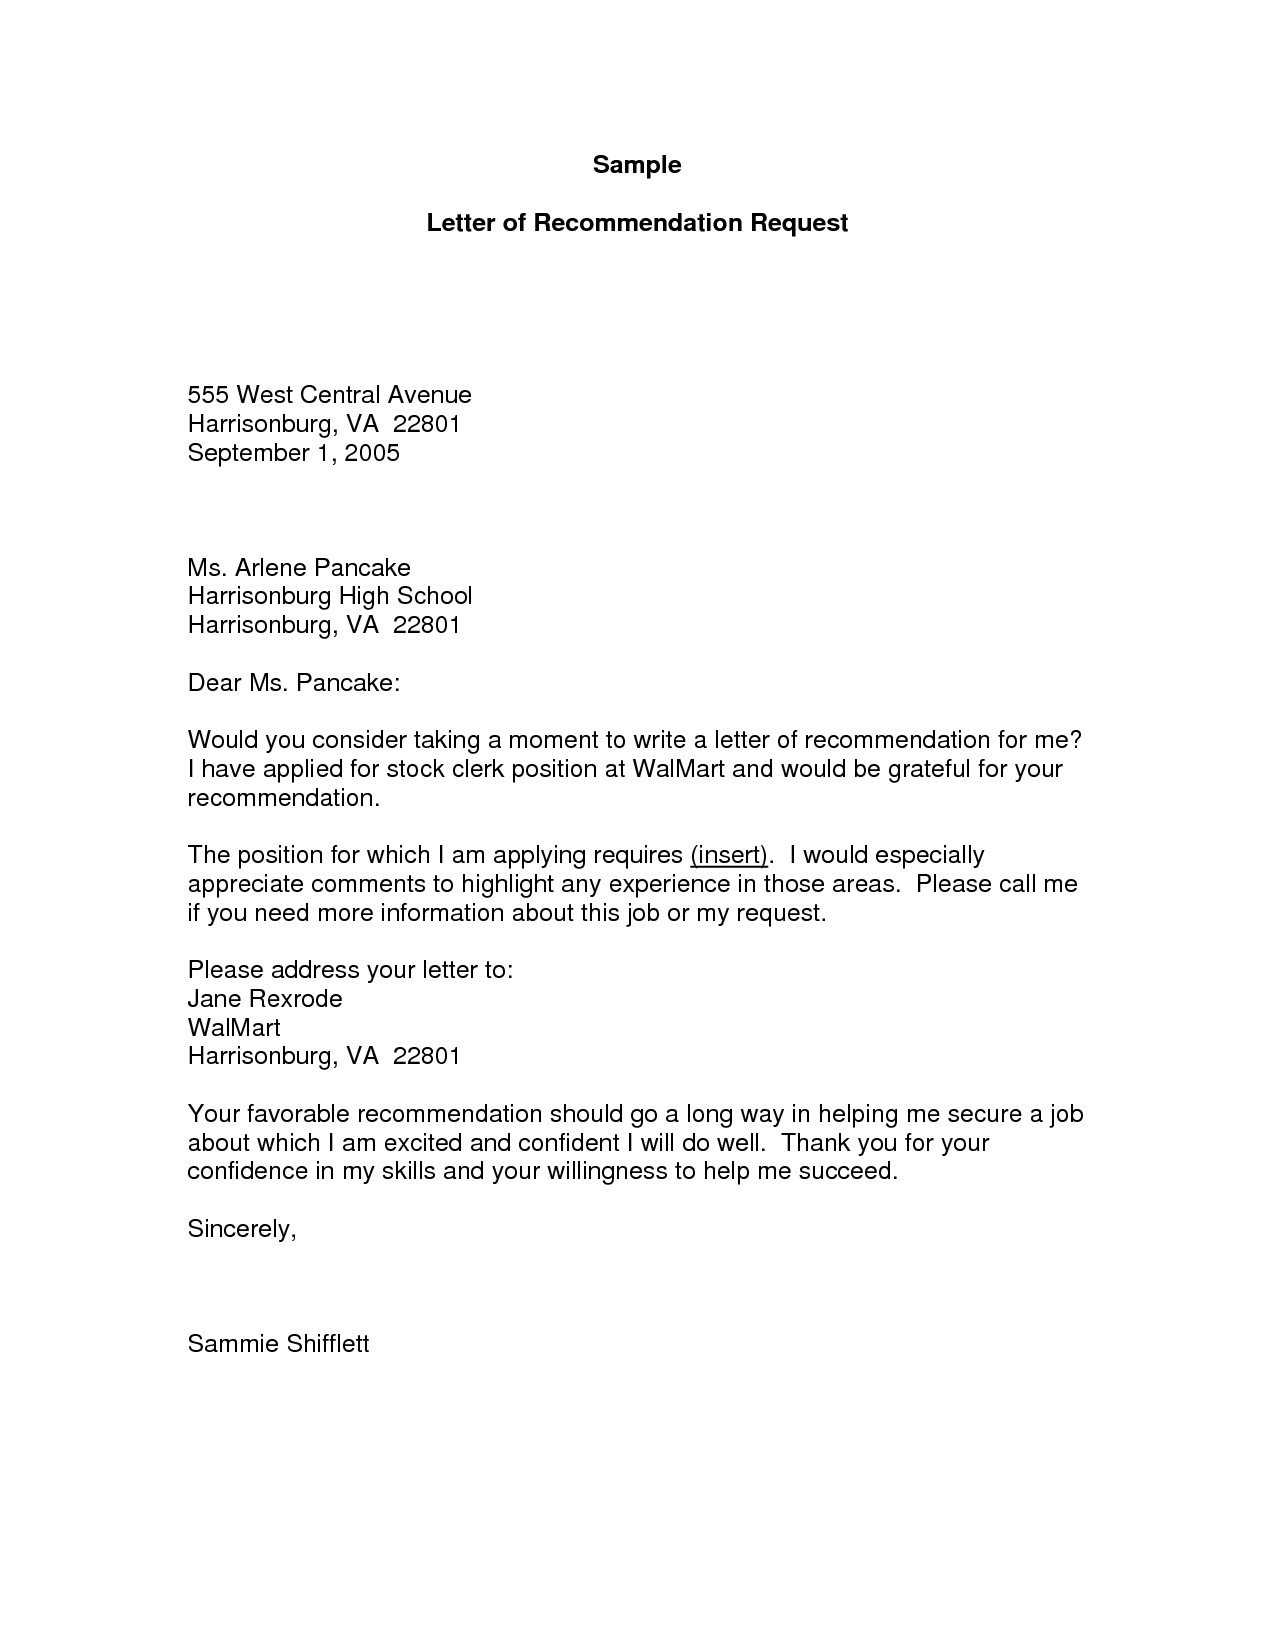 Letter Of Recommendation Request Template - Samples Letters Re Mendation for A Job Refrence Gallery